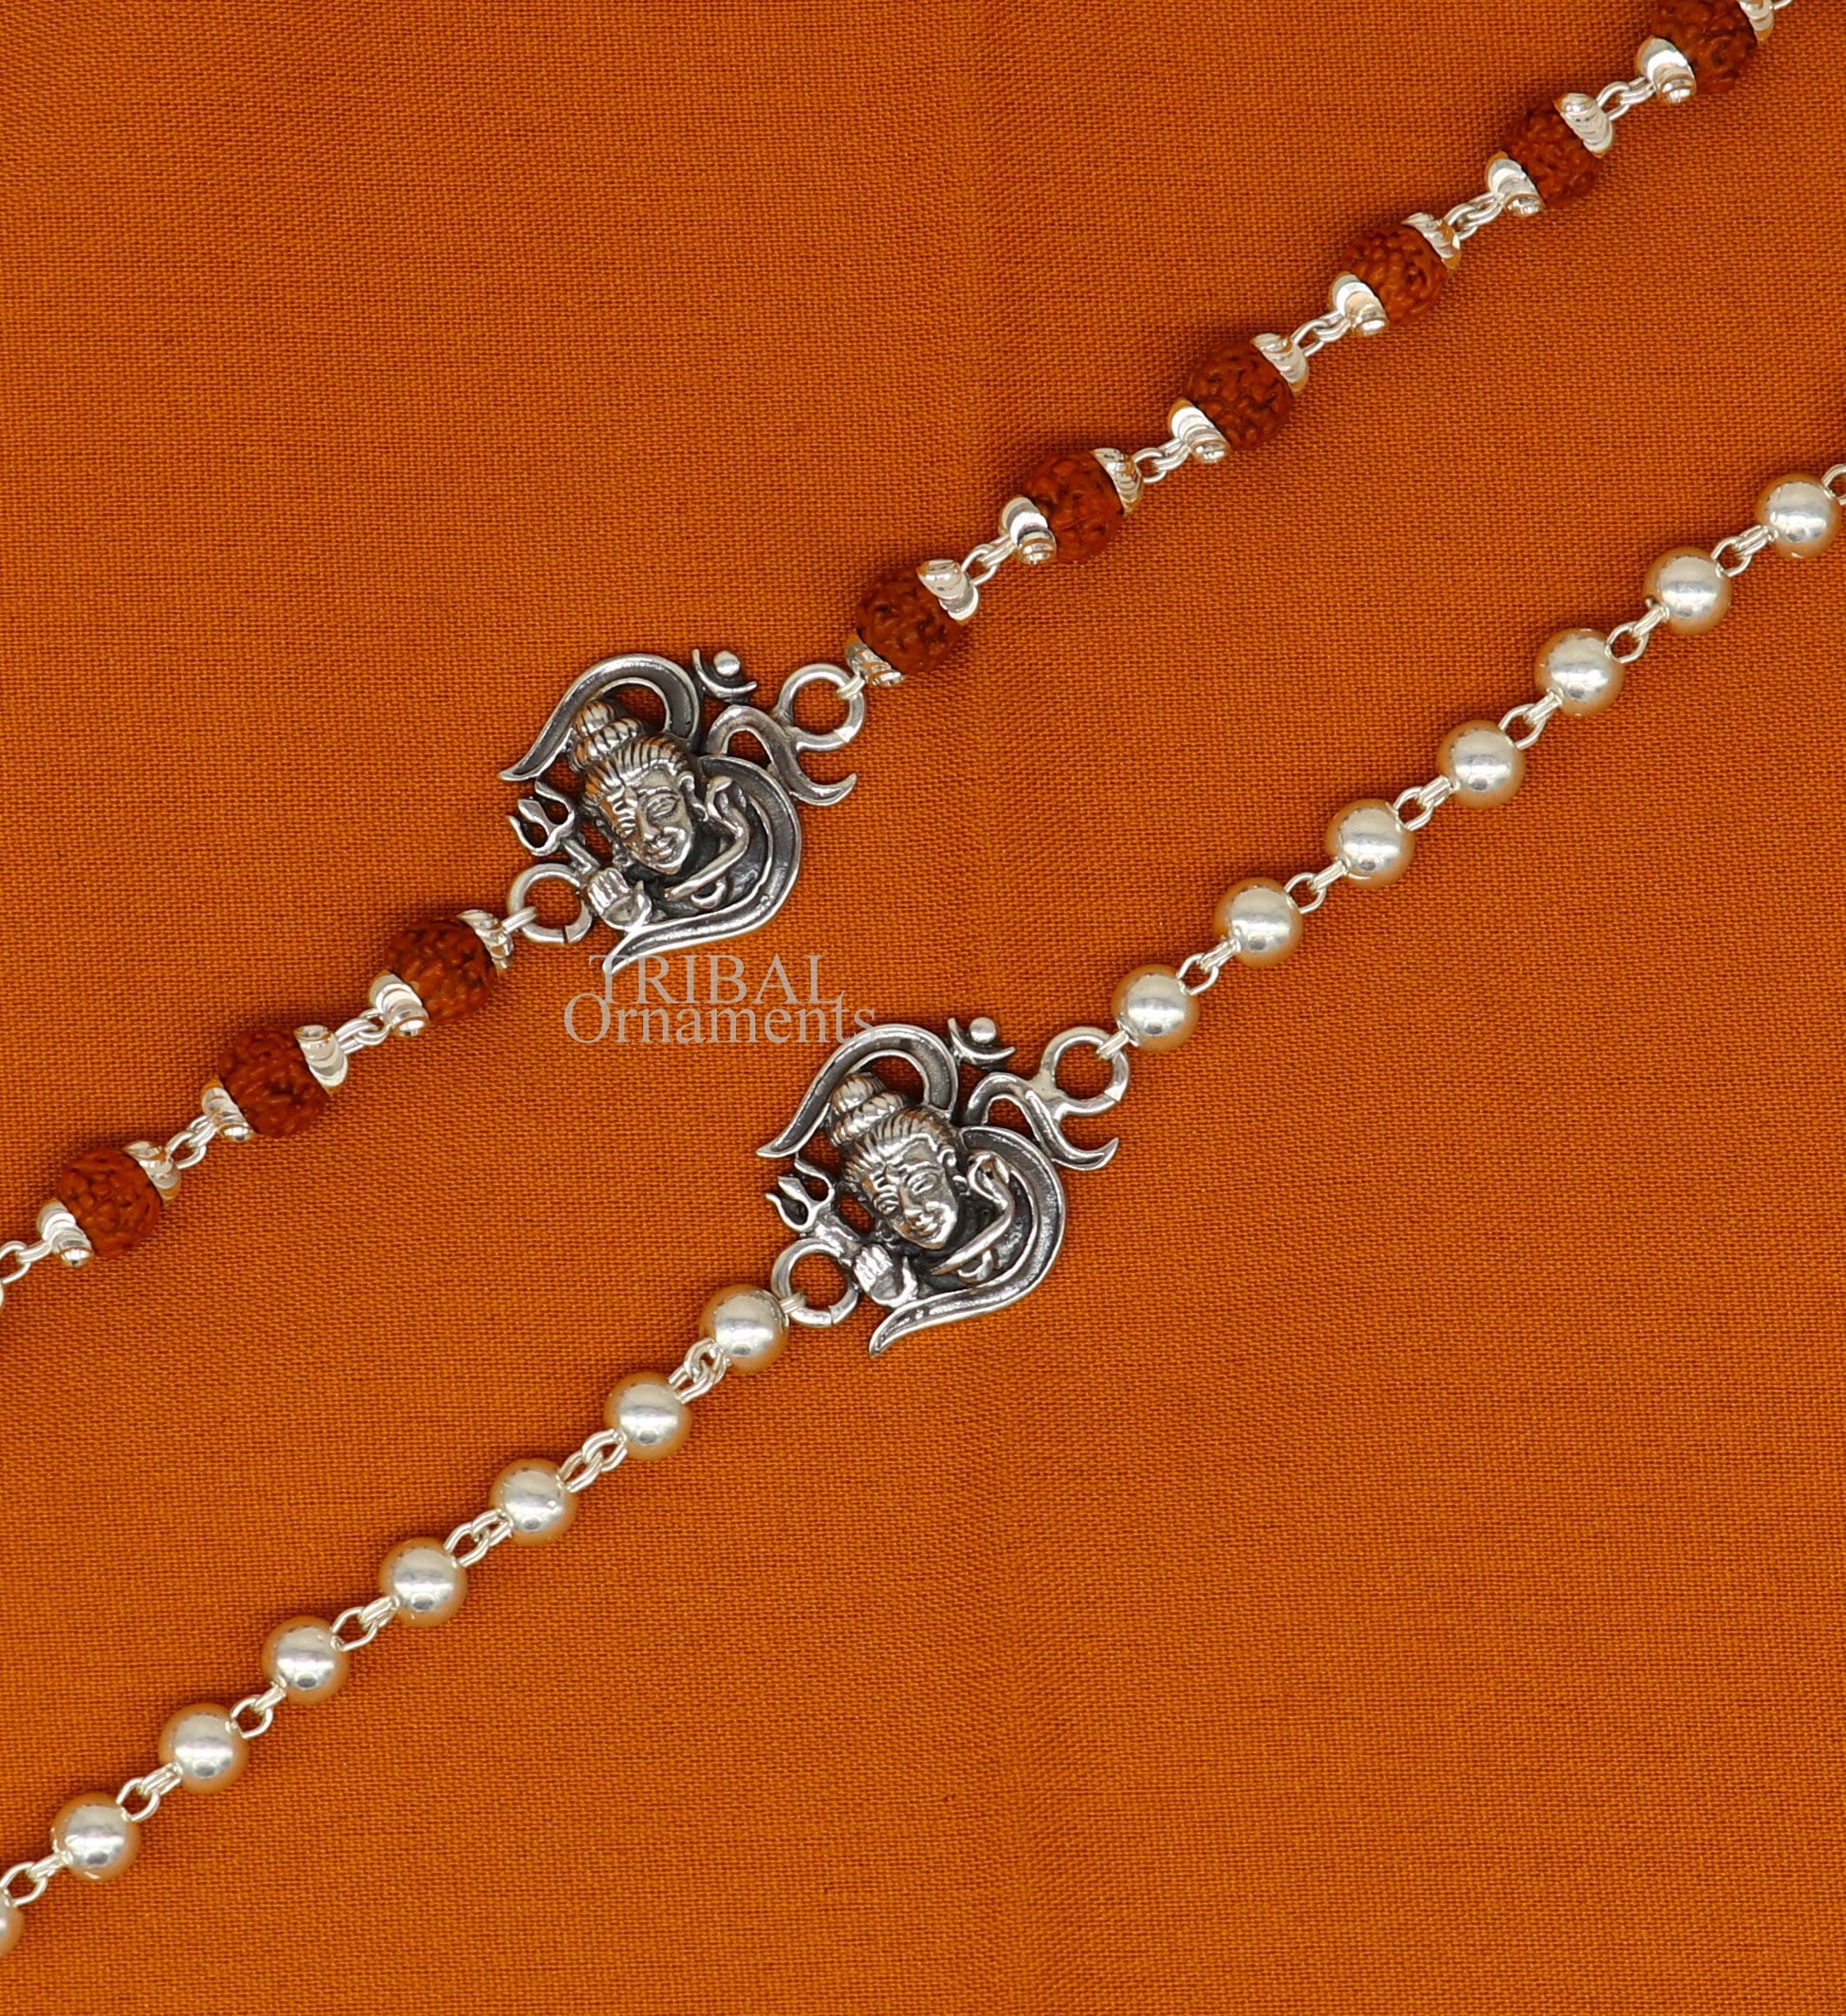 Lord Shiva Rakhi 925 Sterling silver Rakhi bracelet Rrudrakha and silver beads best gift for your brother's for special gifting rk199 - TRIBAL ORNAMENTS